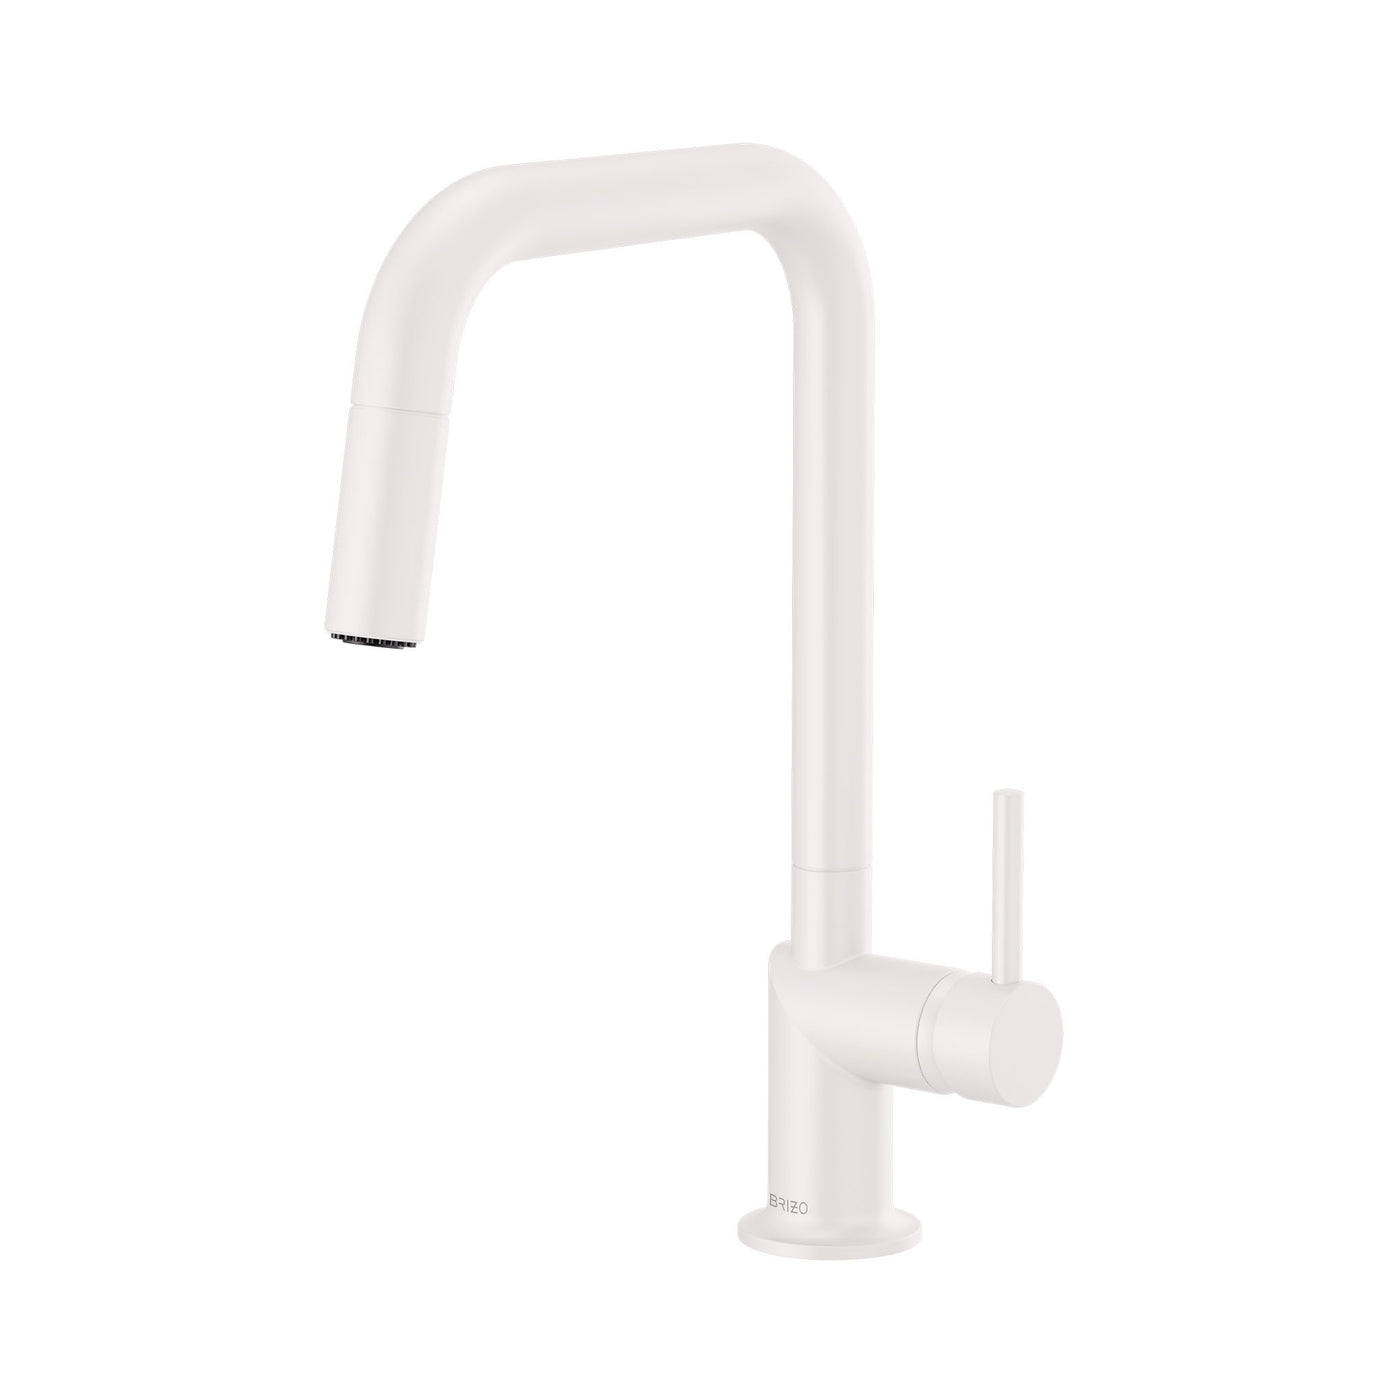 Jason Wu For Brizo™ Pull-Down Faucet with Square Spout